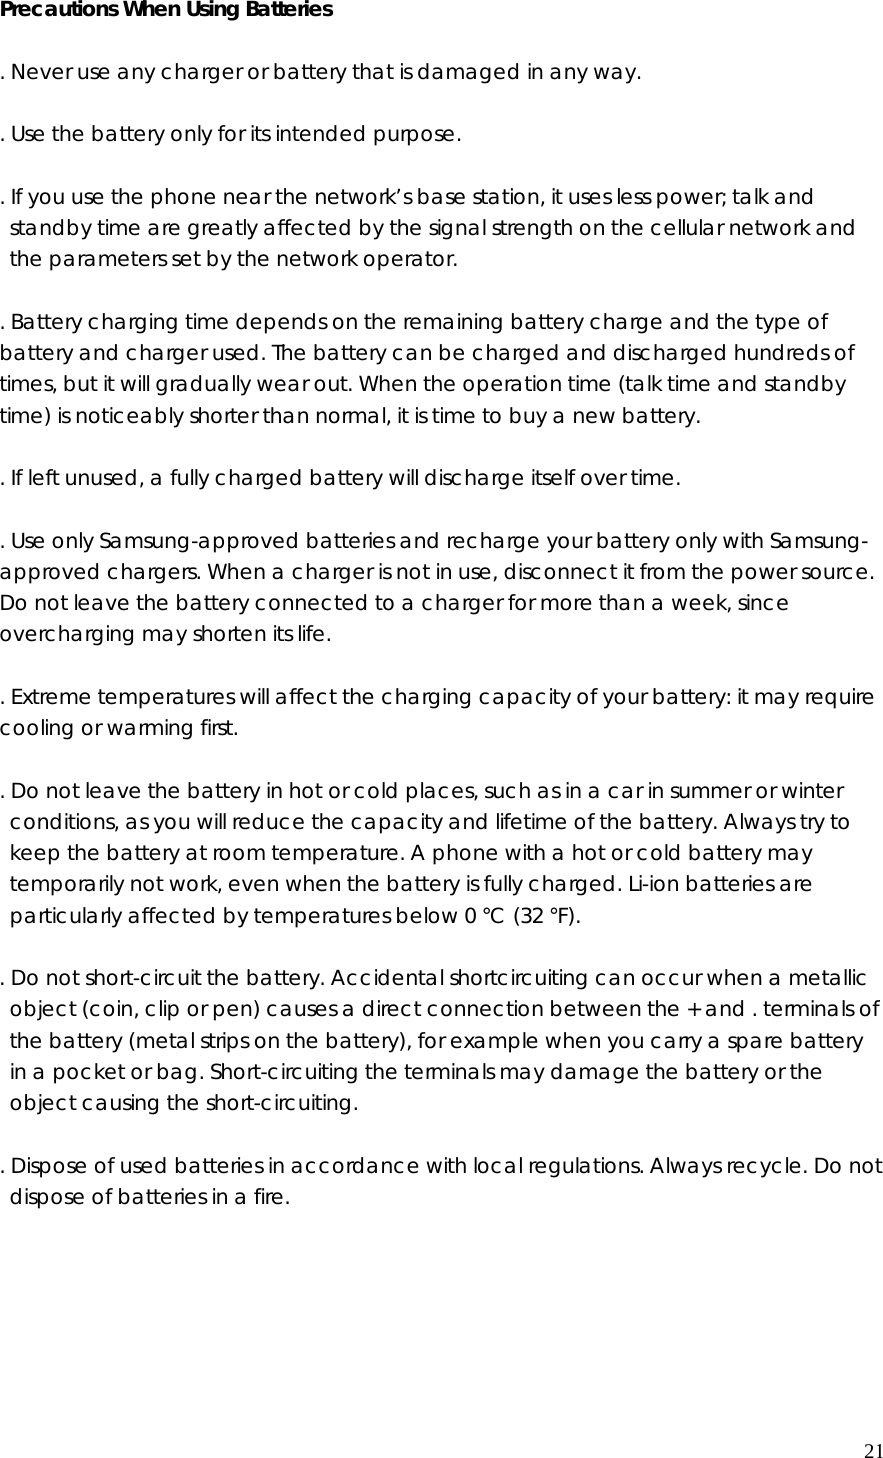 Precautions When Using Batteries  . Never use any charger or battery that is damaged in any way.  . Use the battery only for its intended purpose.  . If you use the phone near the network’s base station, it uses less power; talk and standby time are greatly affected by the signal strength on the cellular network and the parameters set by the network operator.  . Battery charging time depends on the remaining battery charge and the type of battery and charger used. The battery can be charged and discharged hundreds of times, but it will gradually wear out. When the operation time (talk time and standby time) is noticeably shorter than normal, it is time to buy a new battery.  . If left unused, a fully charged battery will discharge itself over time.  . Use only Samsung-approved batteries and recharge your battery only with Samsung-approved chargers. When a charger is not in use, disconnect it from the power source. Do not leave the battery connected to a charger for more than a week, since overcharging may shorten its life.  . Extreme temperatures will affect the charging capacity of your battery: it may require cooling or warming first.  . Do not leave the battery in hot or cold places, such as in a car in summer or winter conditions, as you will reduce the capacity and lifetime of the battery. Always try to keep the battery at room temperature. A phone with a hot or cold battery may temporarily not work, even when the battery is fully charged. Li-ion batteries are particularly affected by temperatures below 0 °C (32 °F).  . Do not short-circuit the battery. Accidental shortcircuiting can occur when a metallic object (coin, clip or pen) causes a direct connection between the + and . terminals of the battery (metal strips on the battery), for example when you carry a spare battery in a pocket or bag. Short-circuiting the terminals may damage the battery or the object causing the short-circuiting.  . Dispose of used batteries in accordance with local regulations. Always recycle. Do not dispose of batteries in a fire.       21